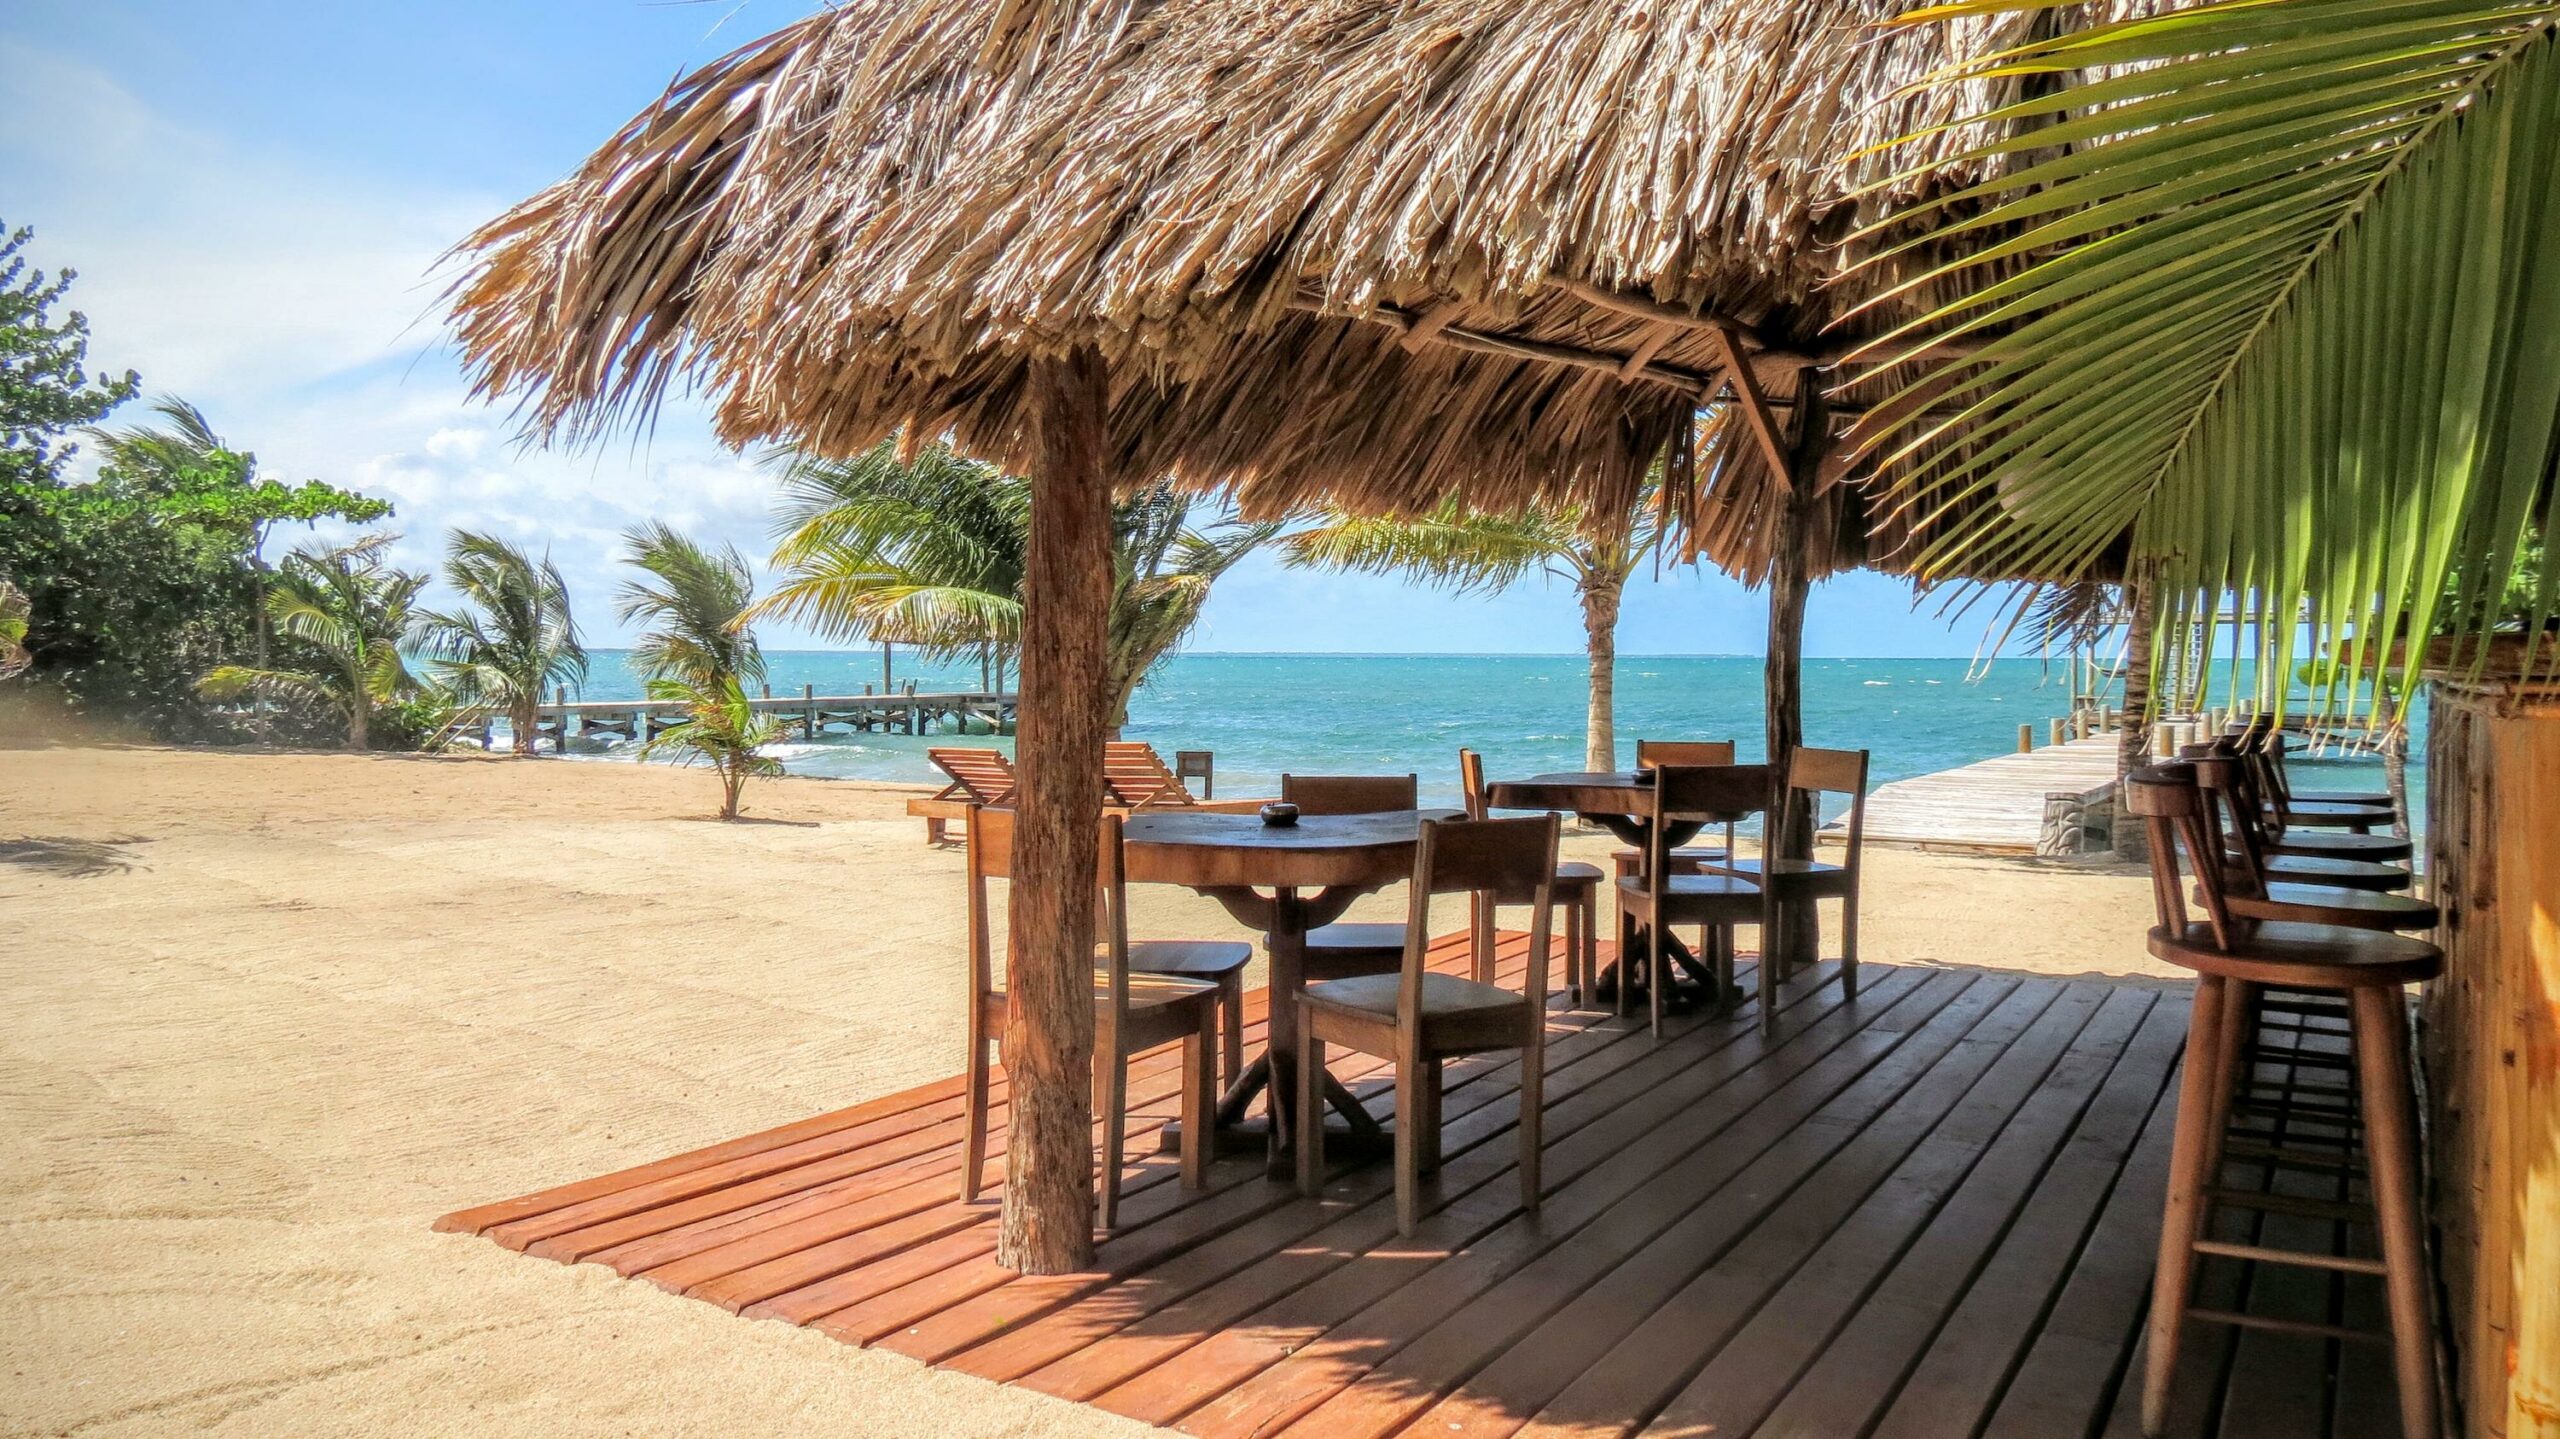 Your fully equipped private thatched beach bar